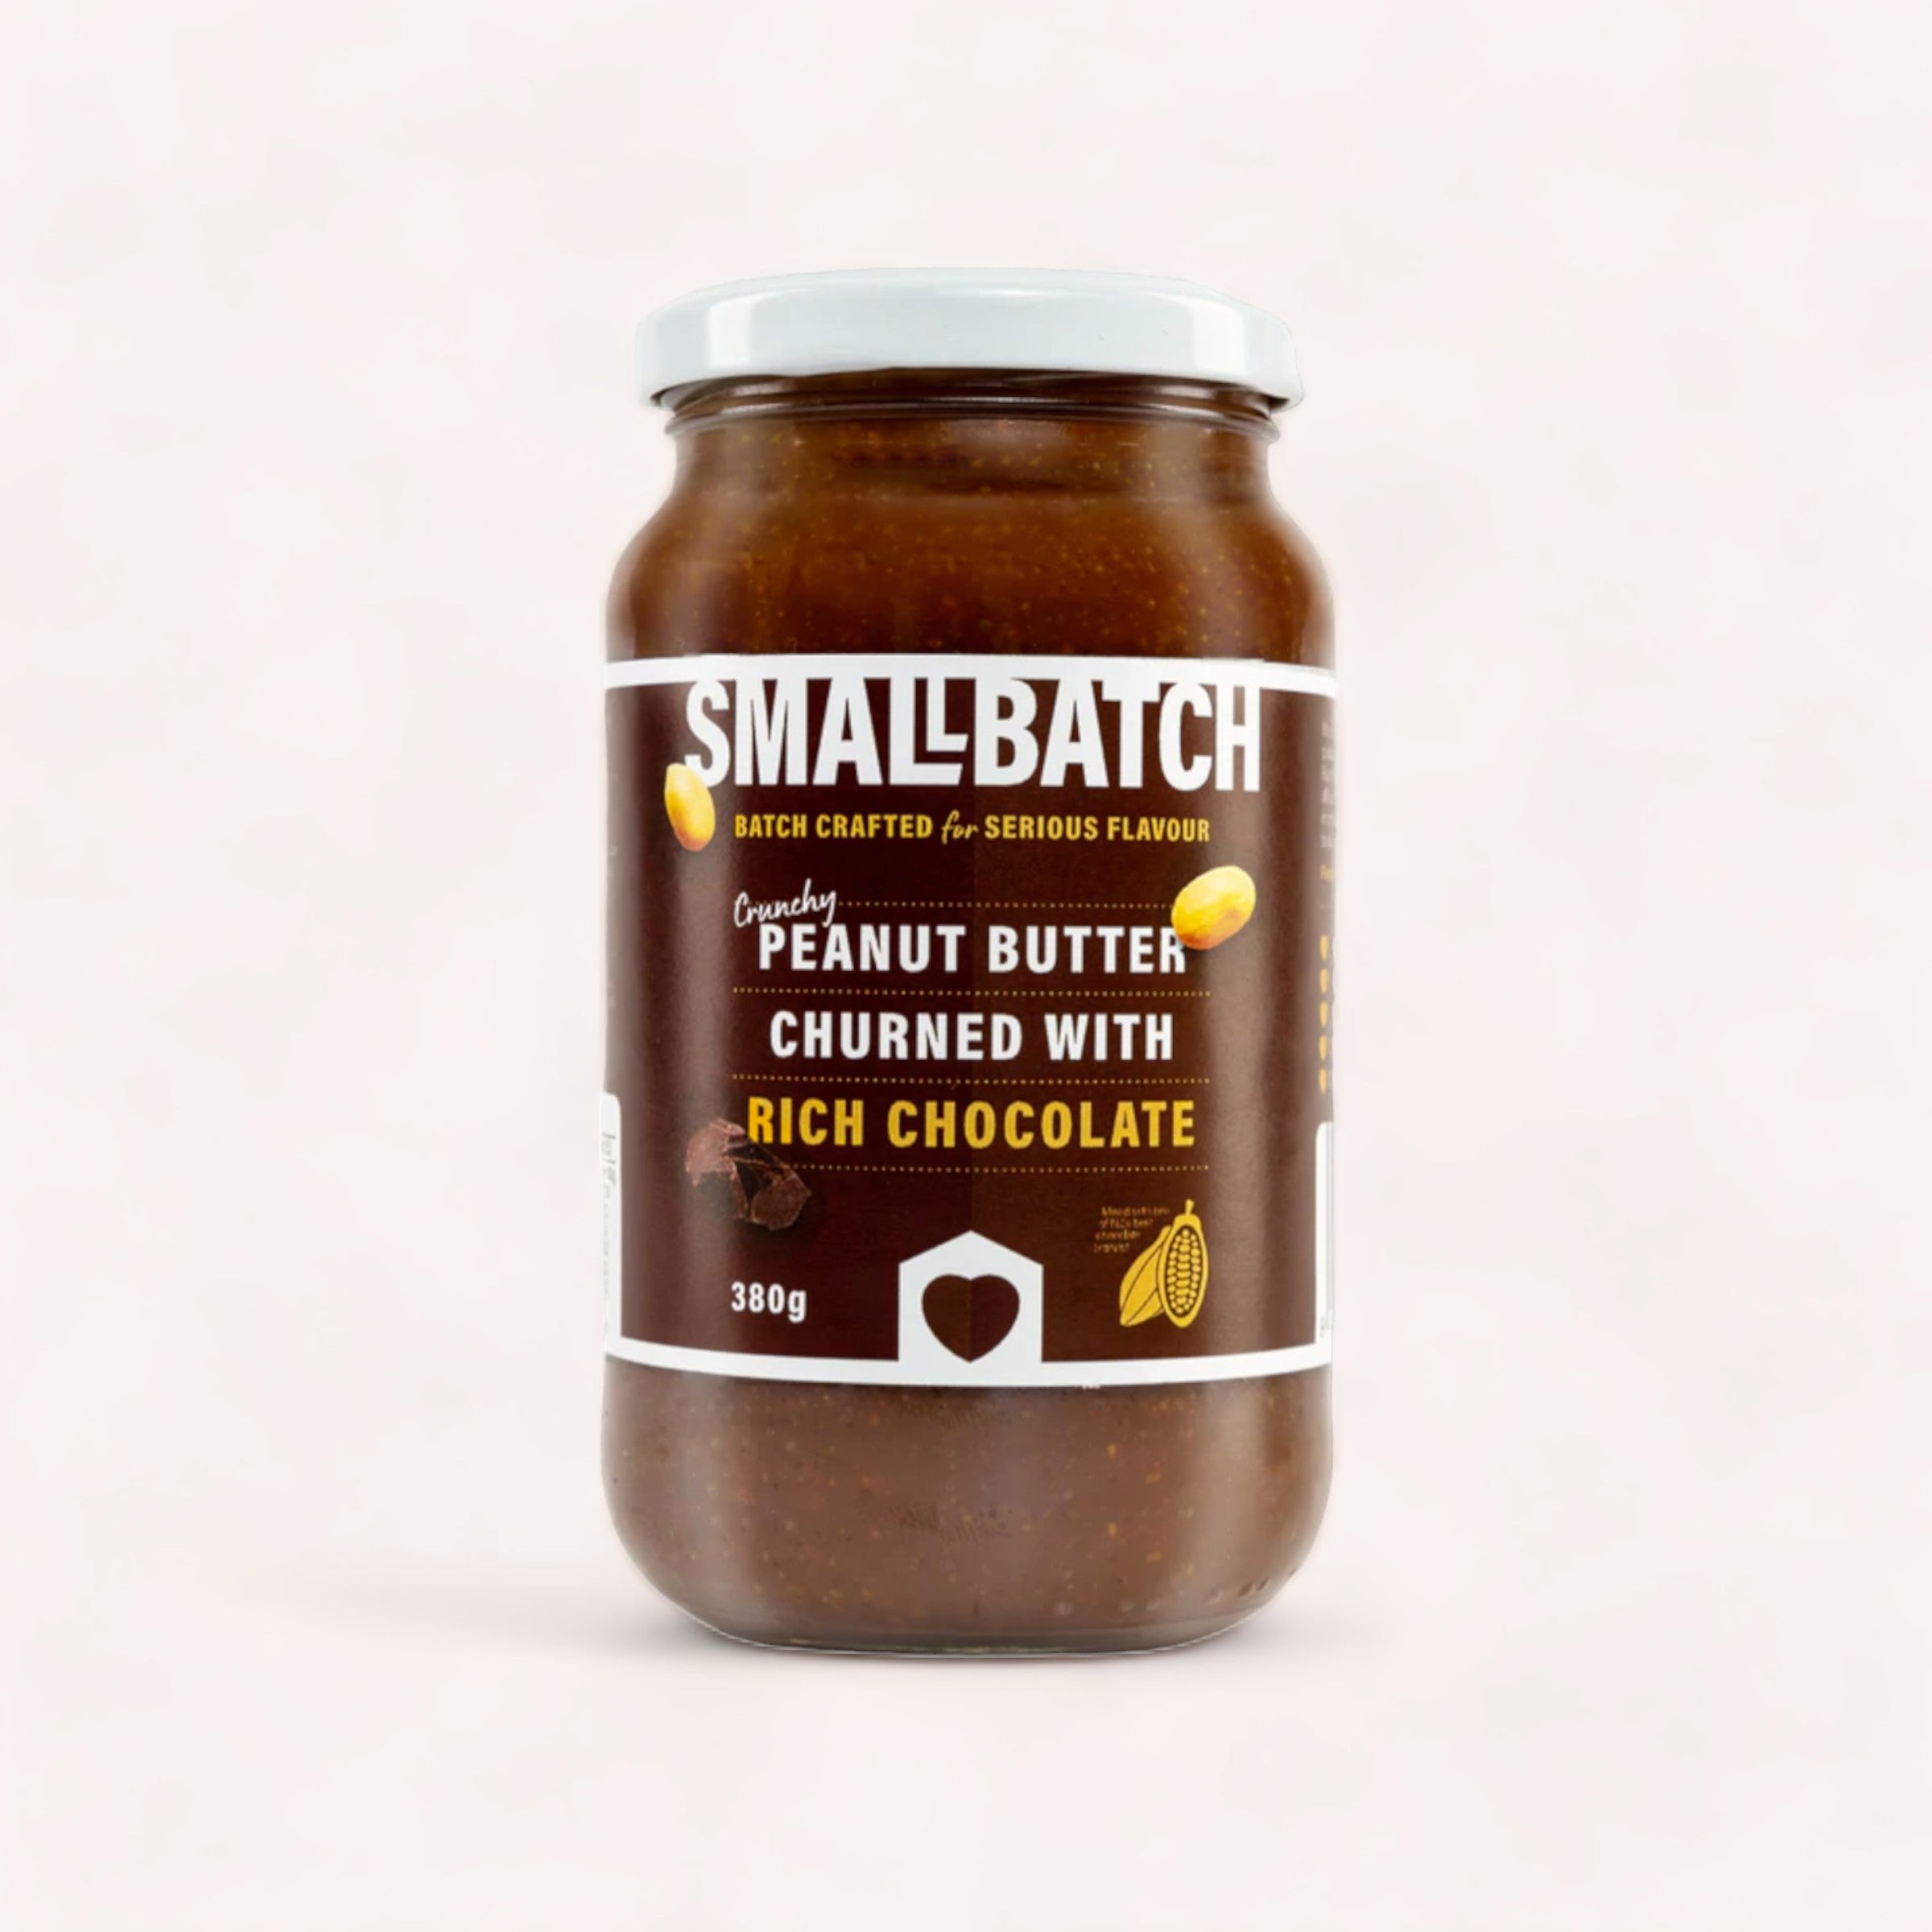 A jar of Chocolate Peanut Butter by Smallbatch churned with rich chocolate and high-oleic peanuts against a neutral background.